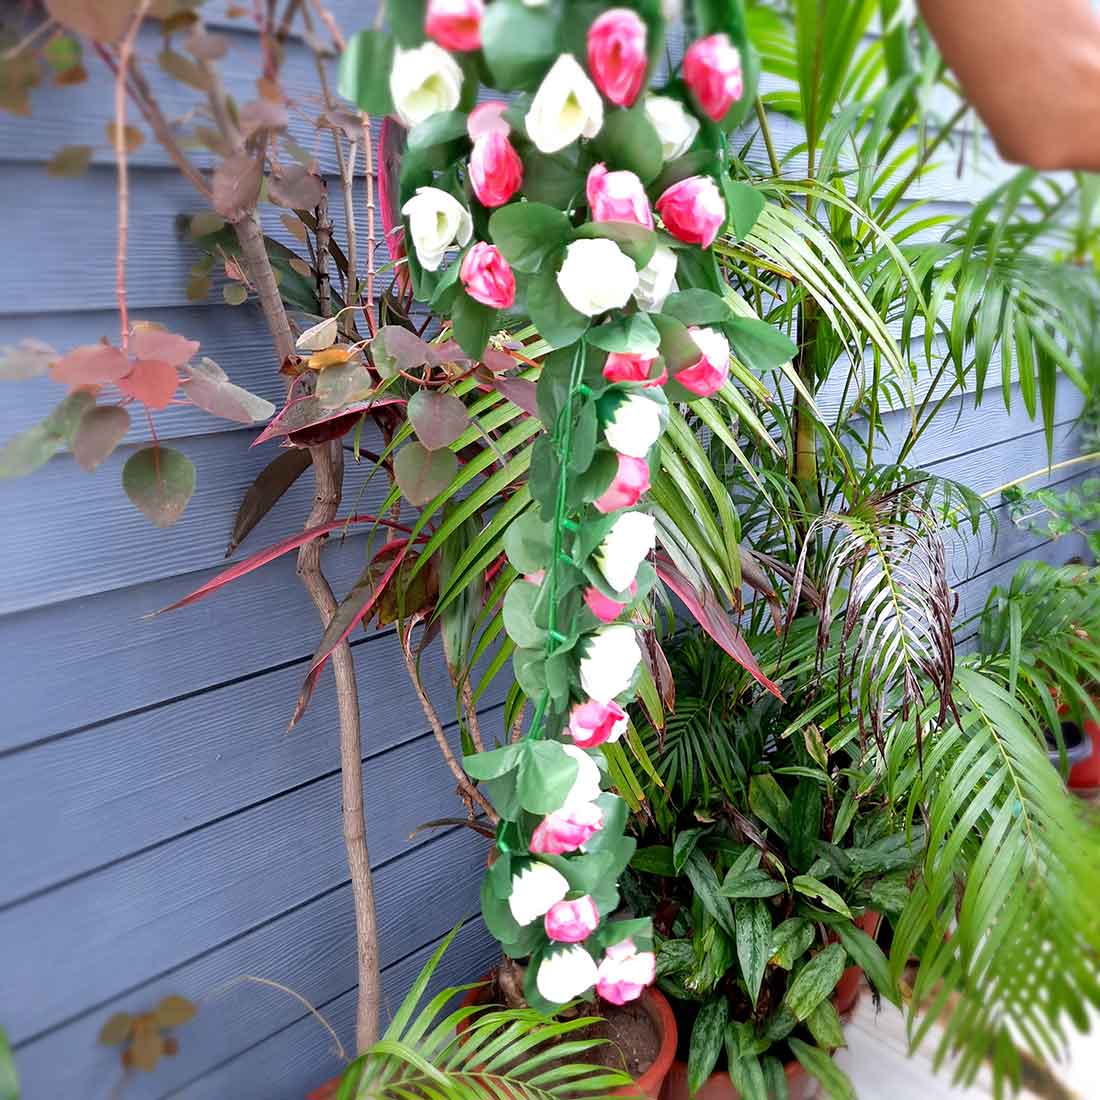 Artificial Wall Hanging Plants- Apkamart #color_White & Pink